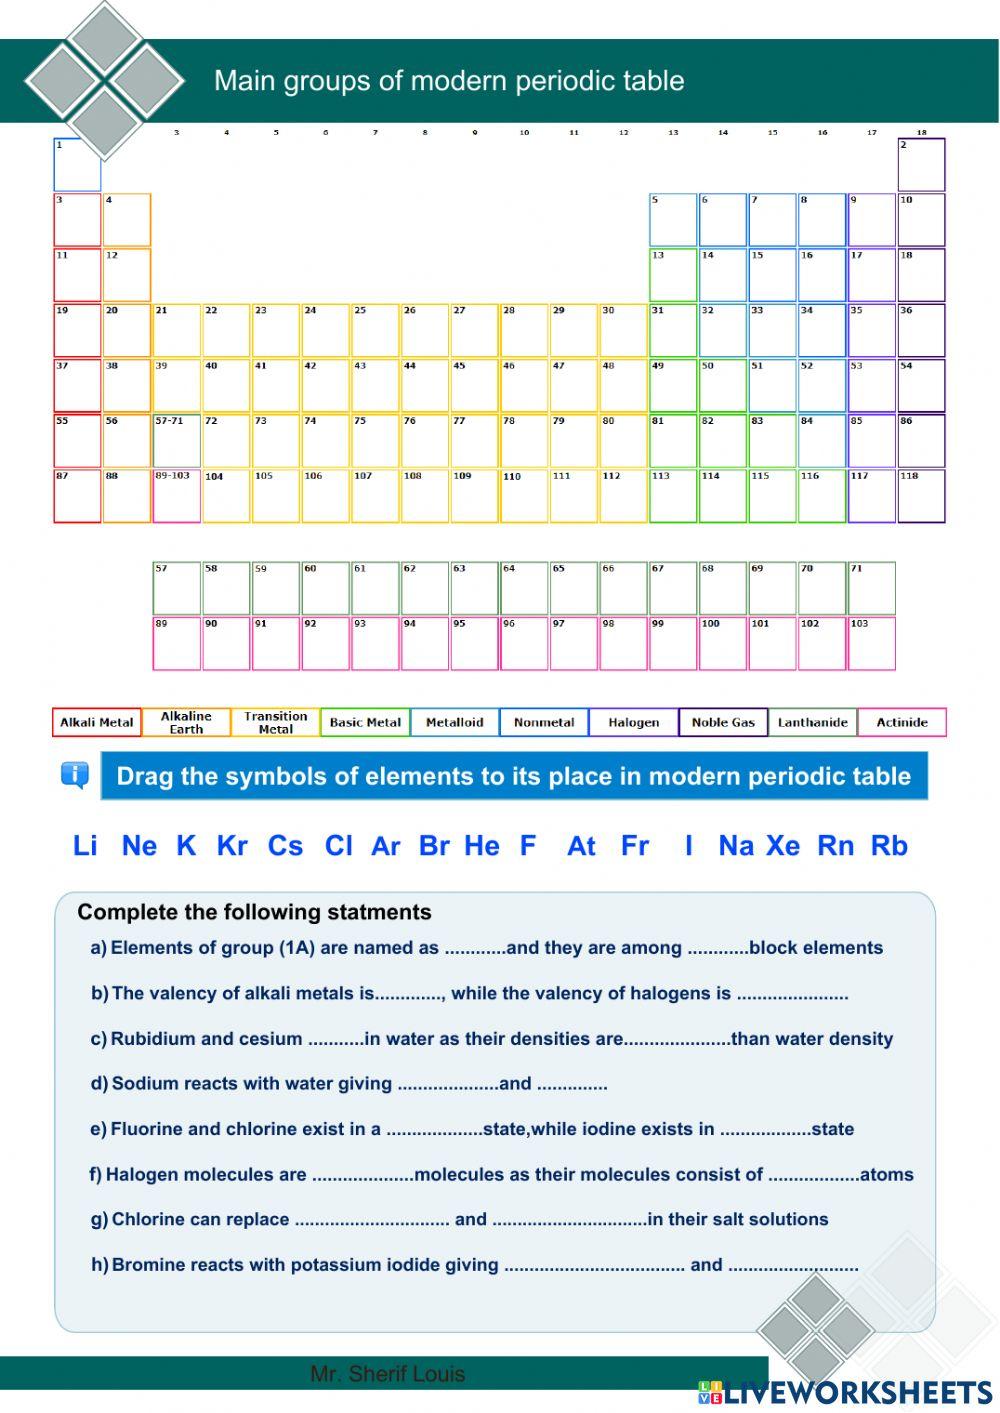 Main groups of modern periodic table